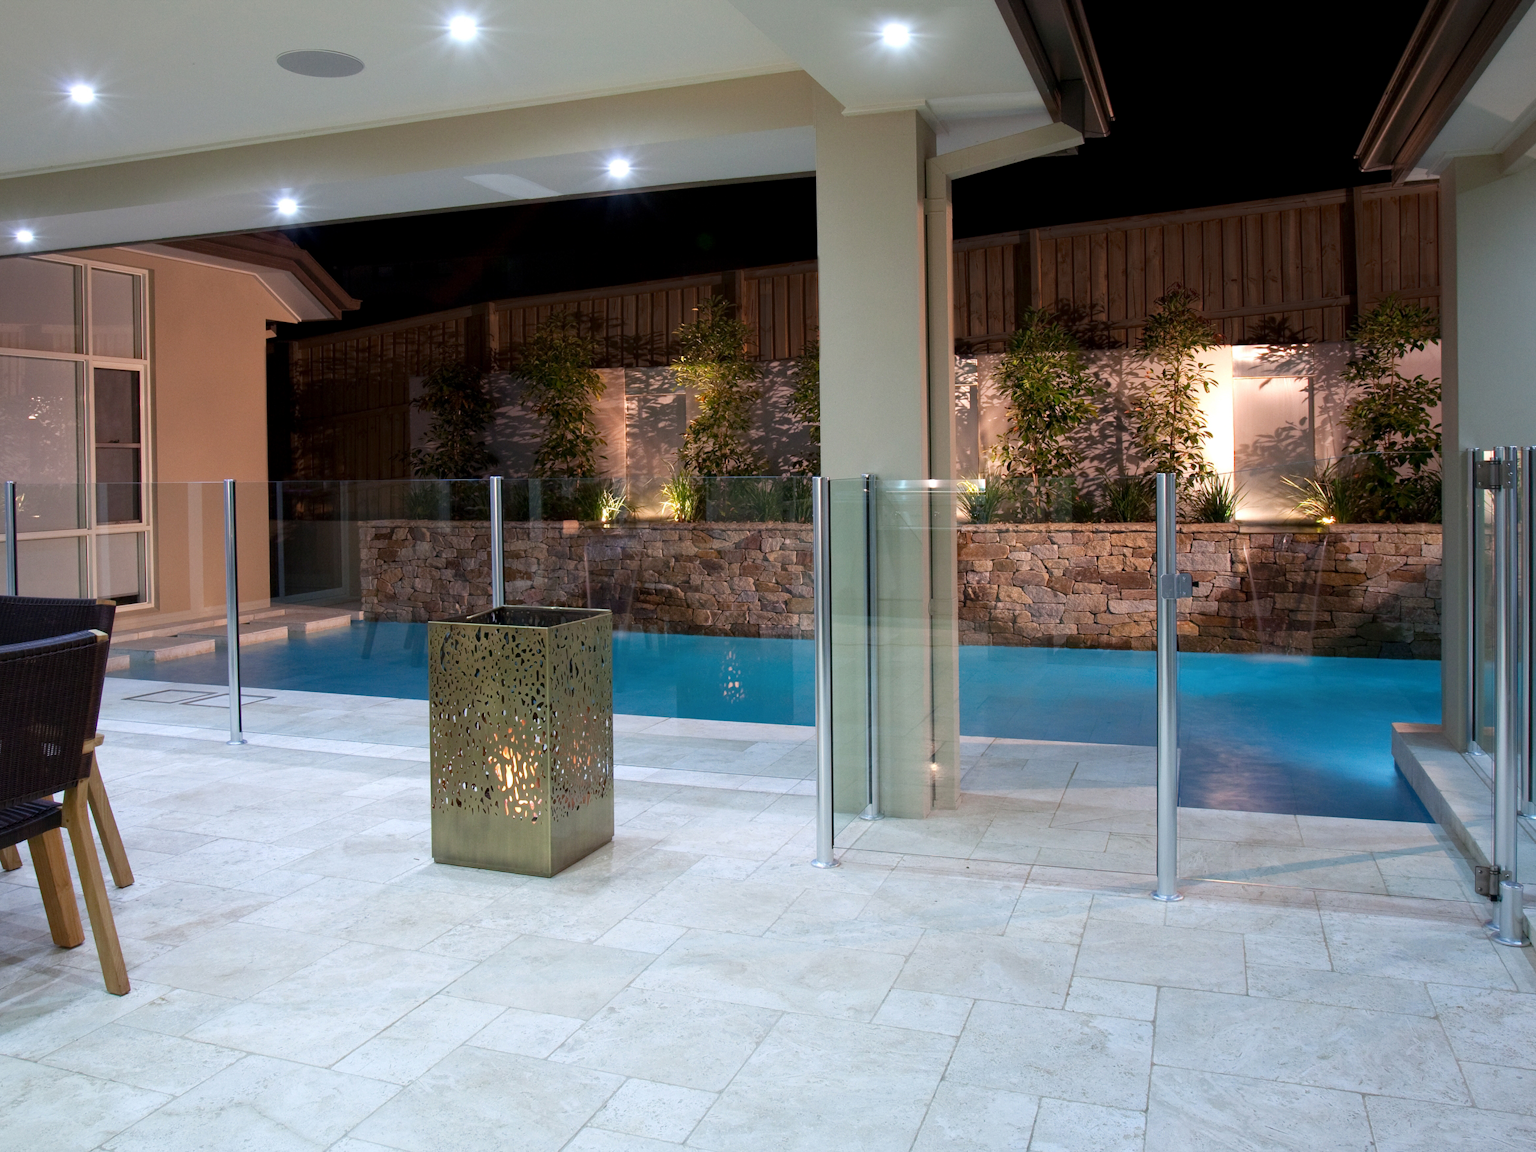 Ravello travertine modular flooring in outdoor dining area with Alpine dry stone walling in pool area